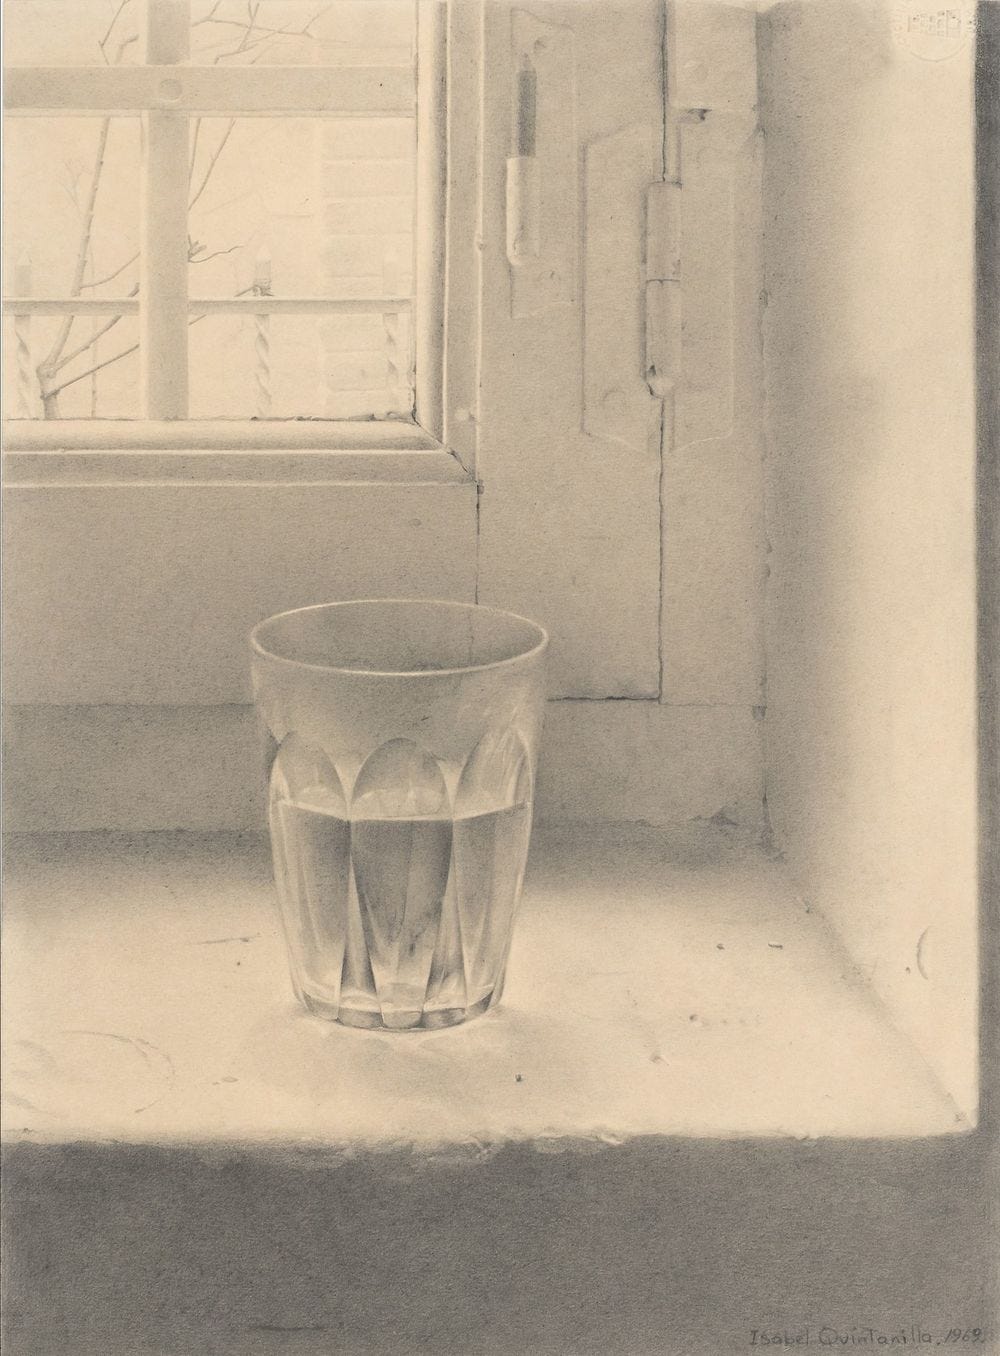 A glass tumbler containing water sits on a window sill.